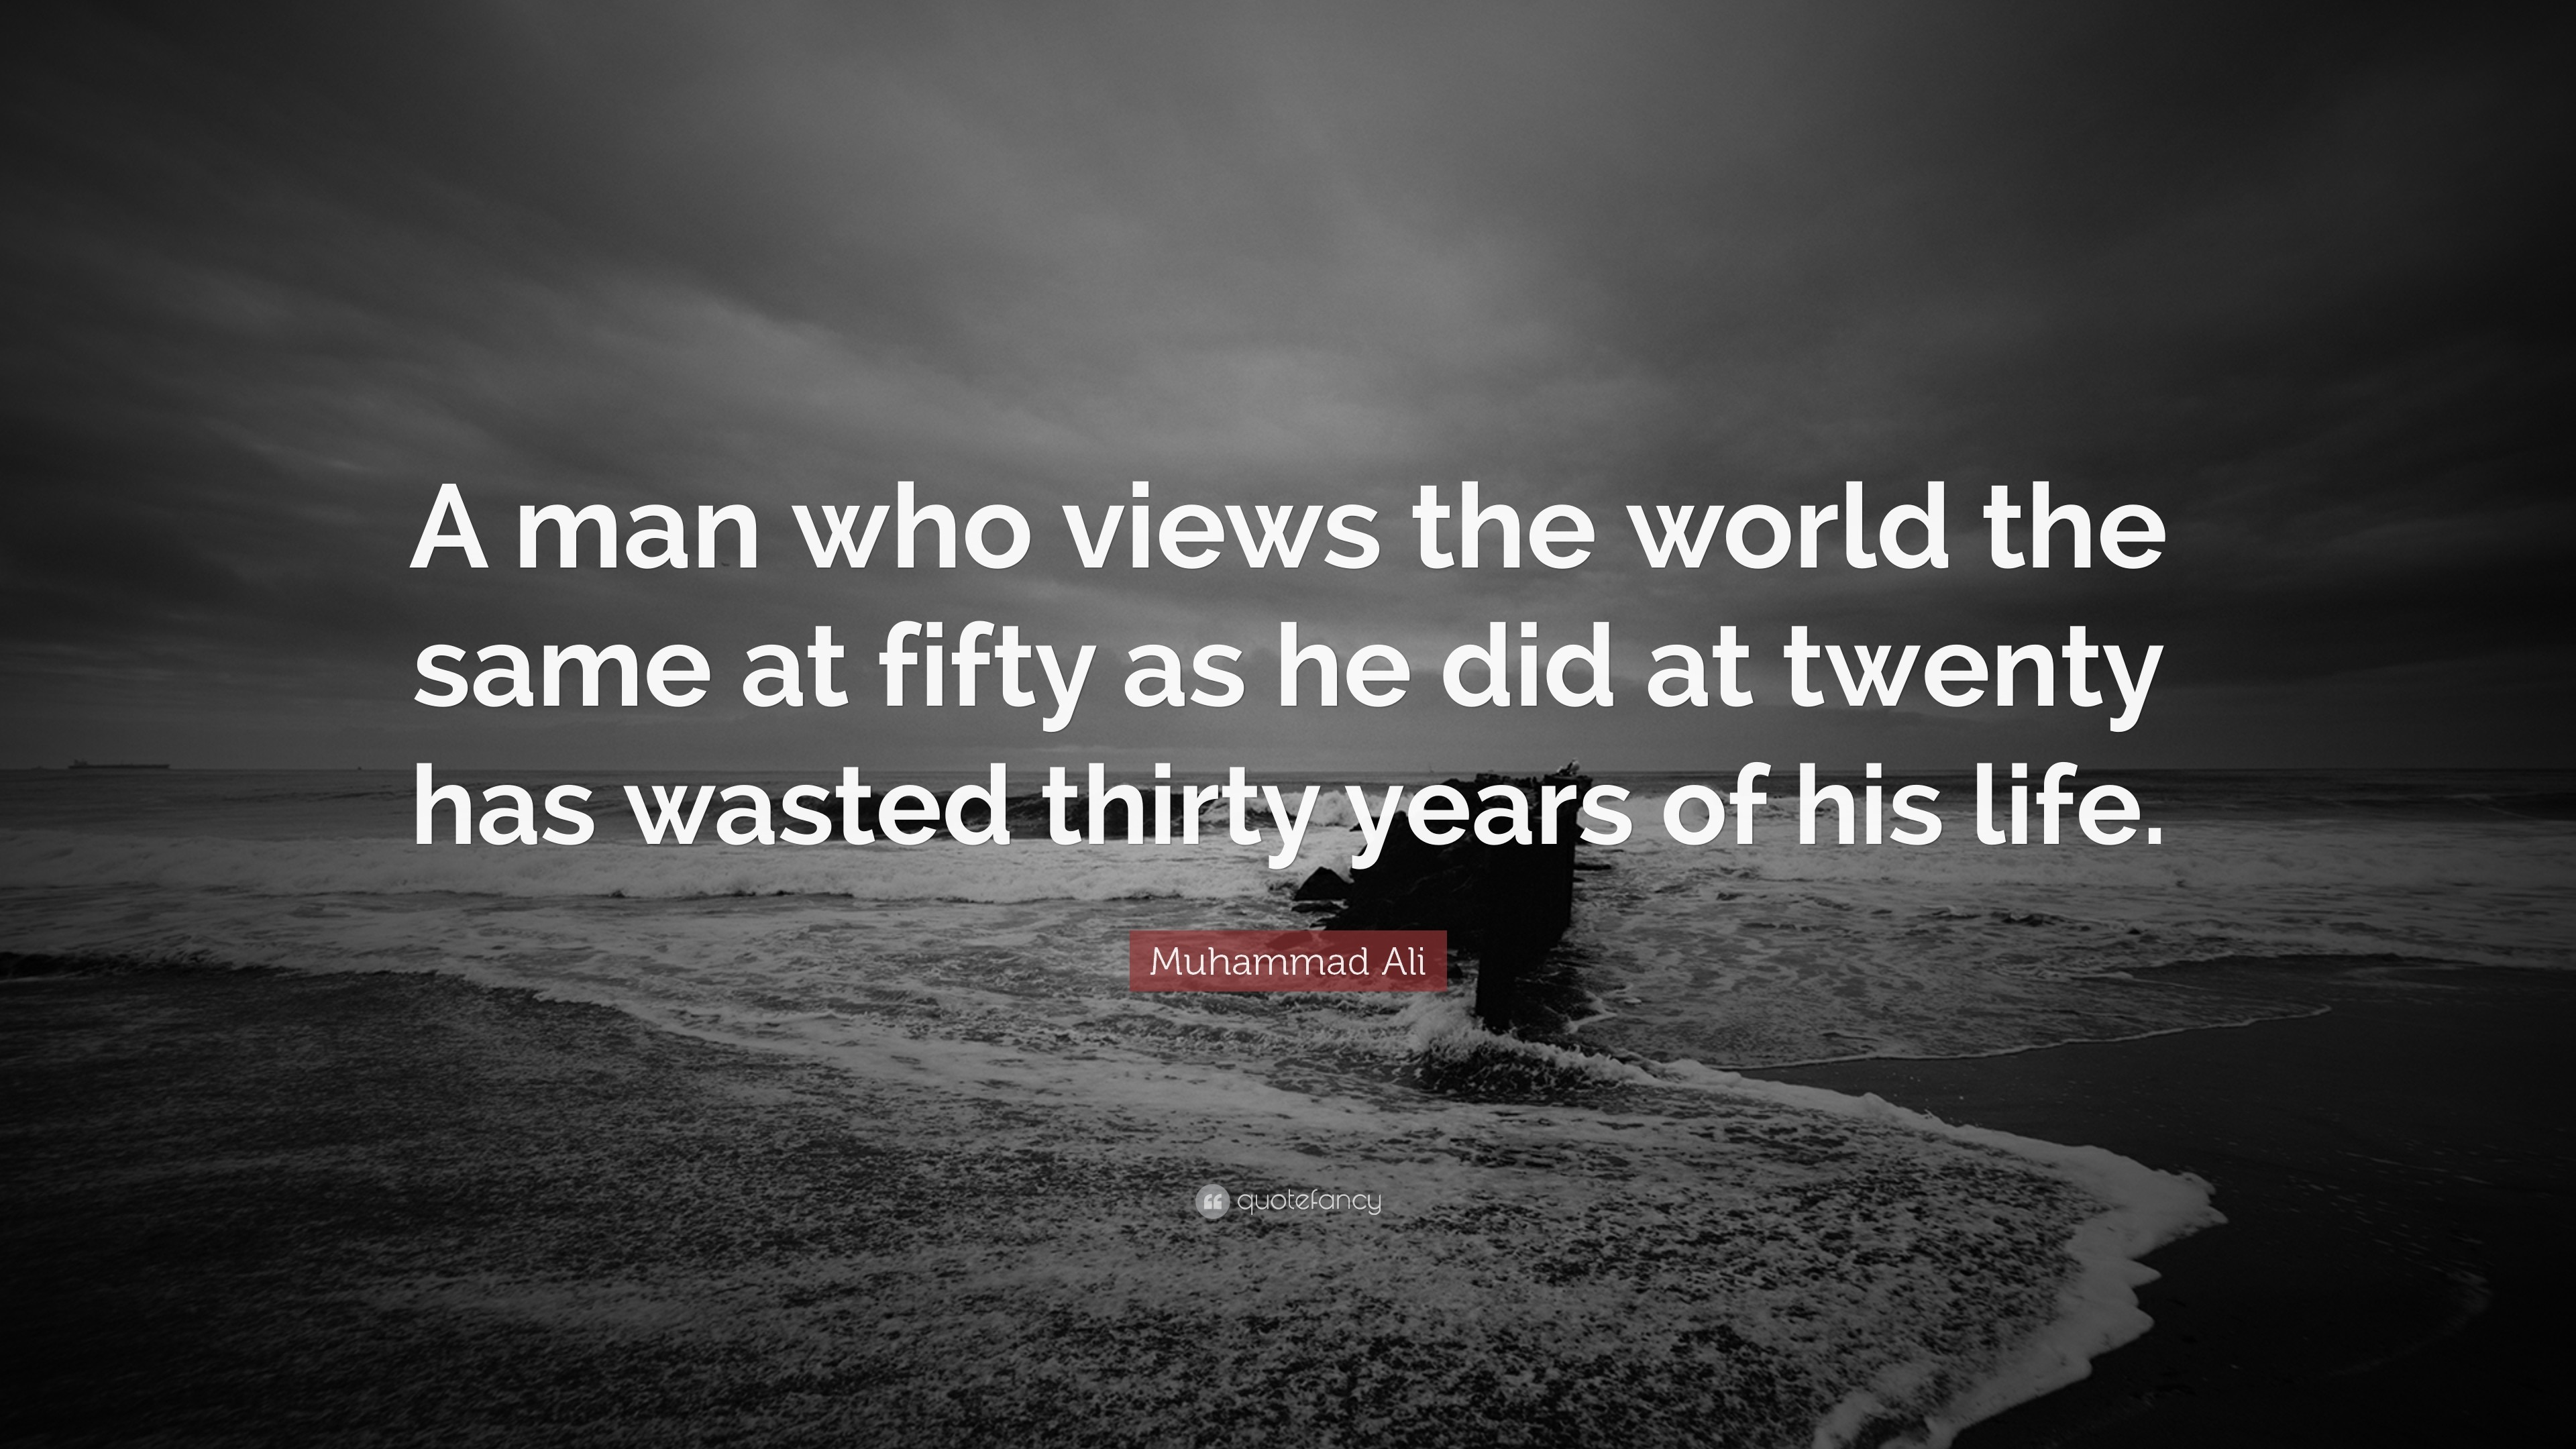 3840x2160 Muhammad Ali Quote: “A man who views the world the same at fifty as